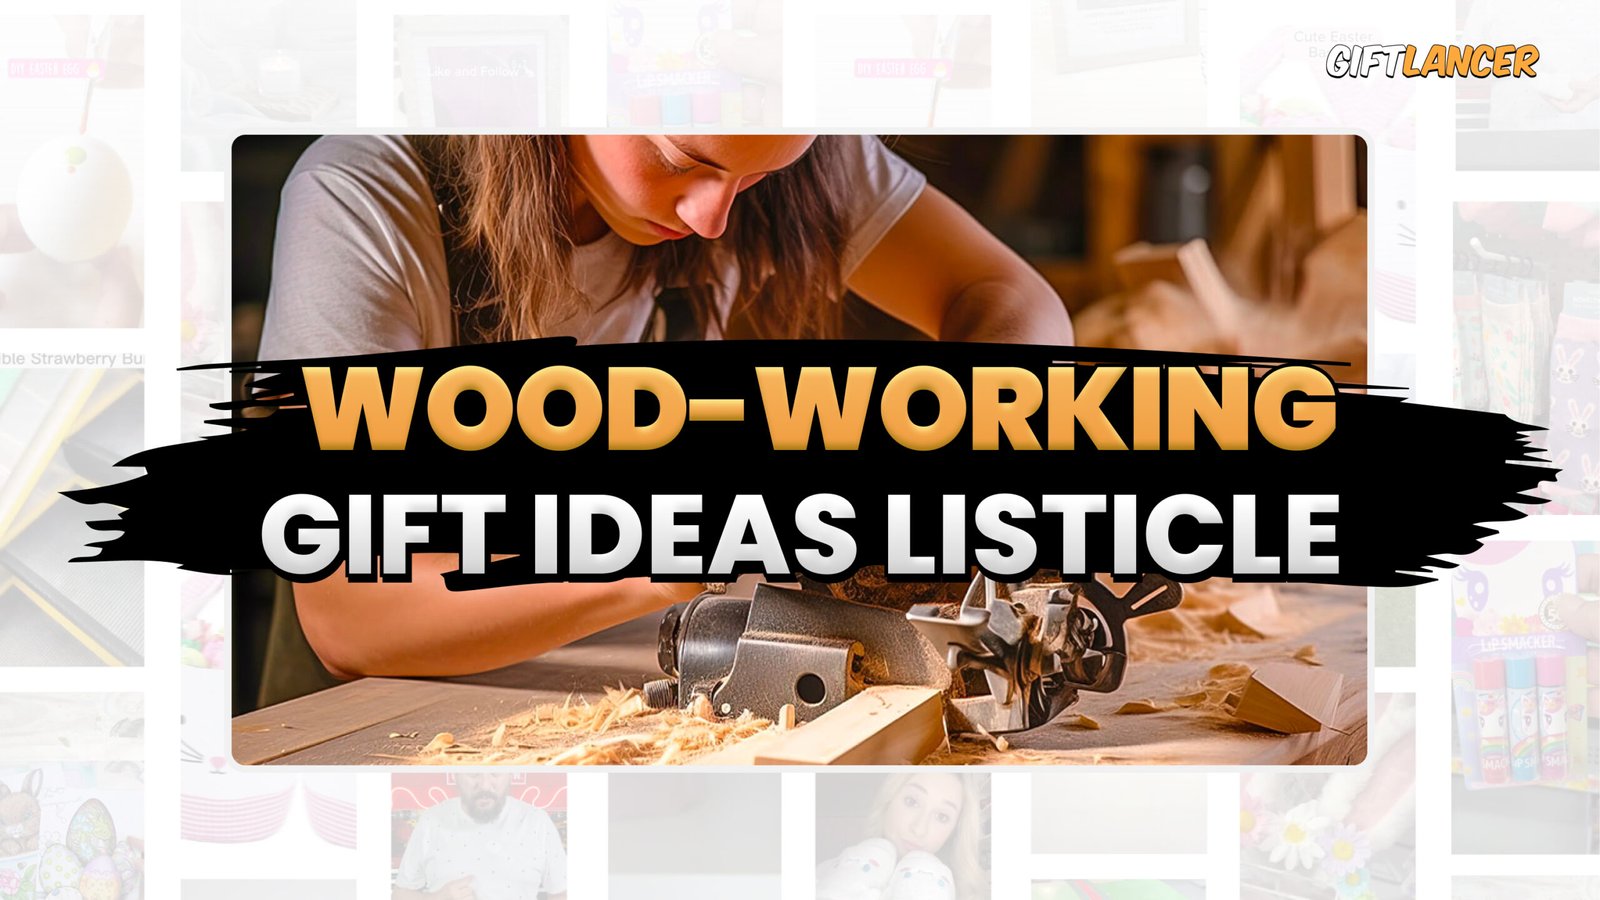 6 Woodworking Gift Ideas for Mom – Advice from a Woodworking Expert Based in the UK